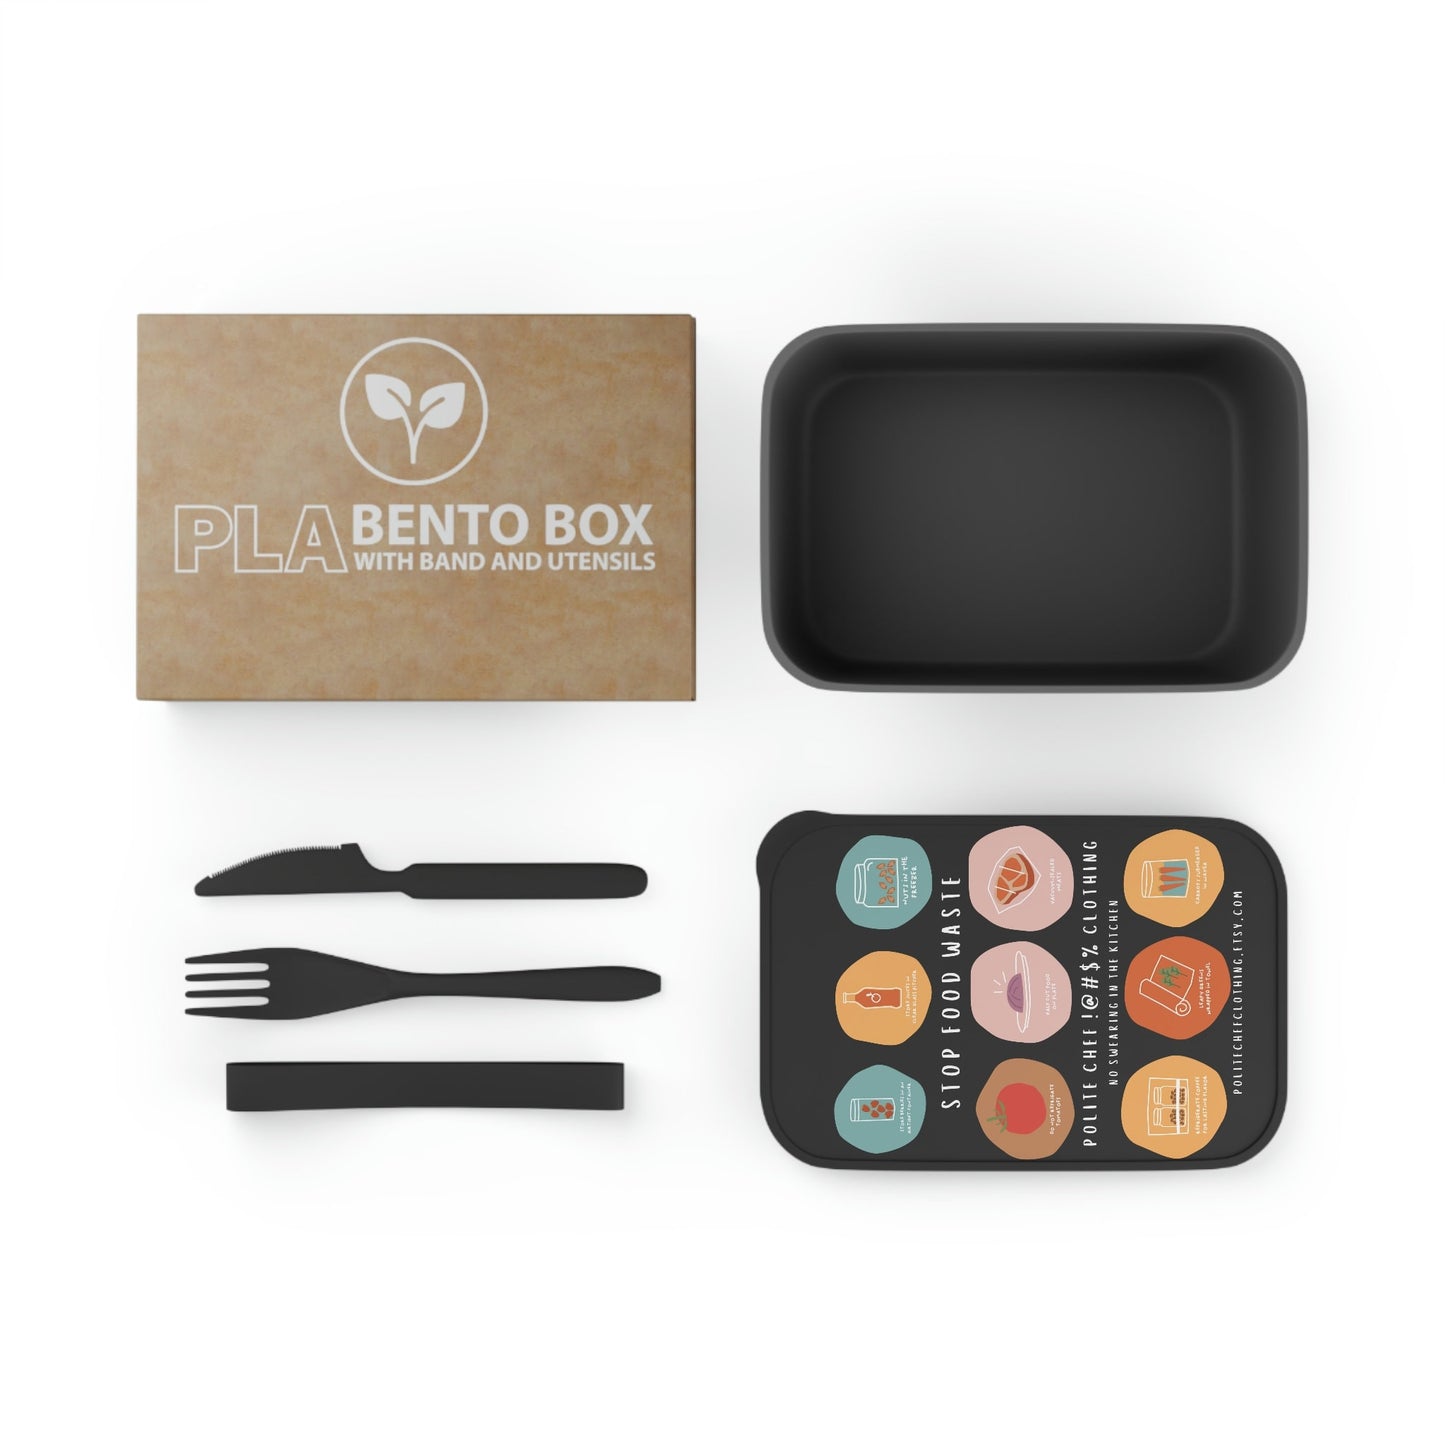 PLA Stop Food Waste Bento Box with Band and Utensils